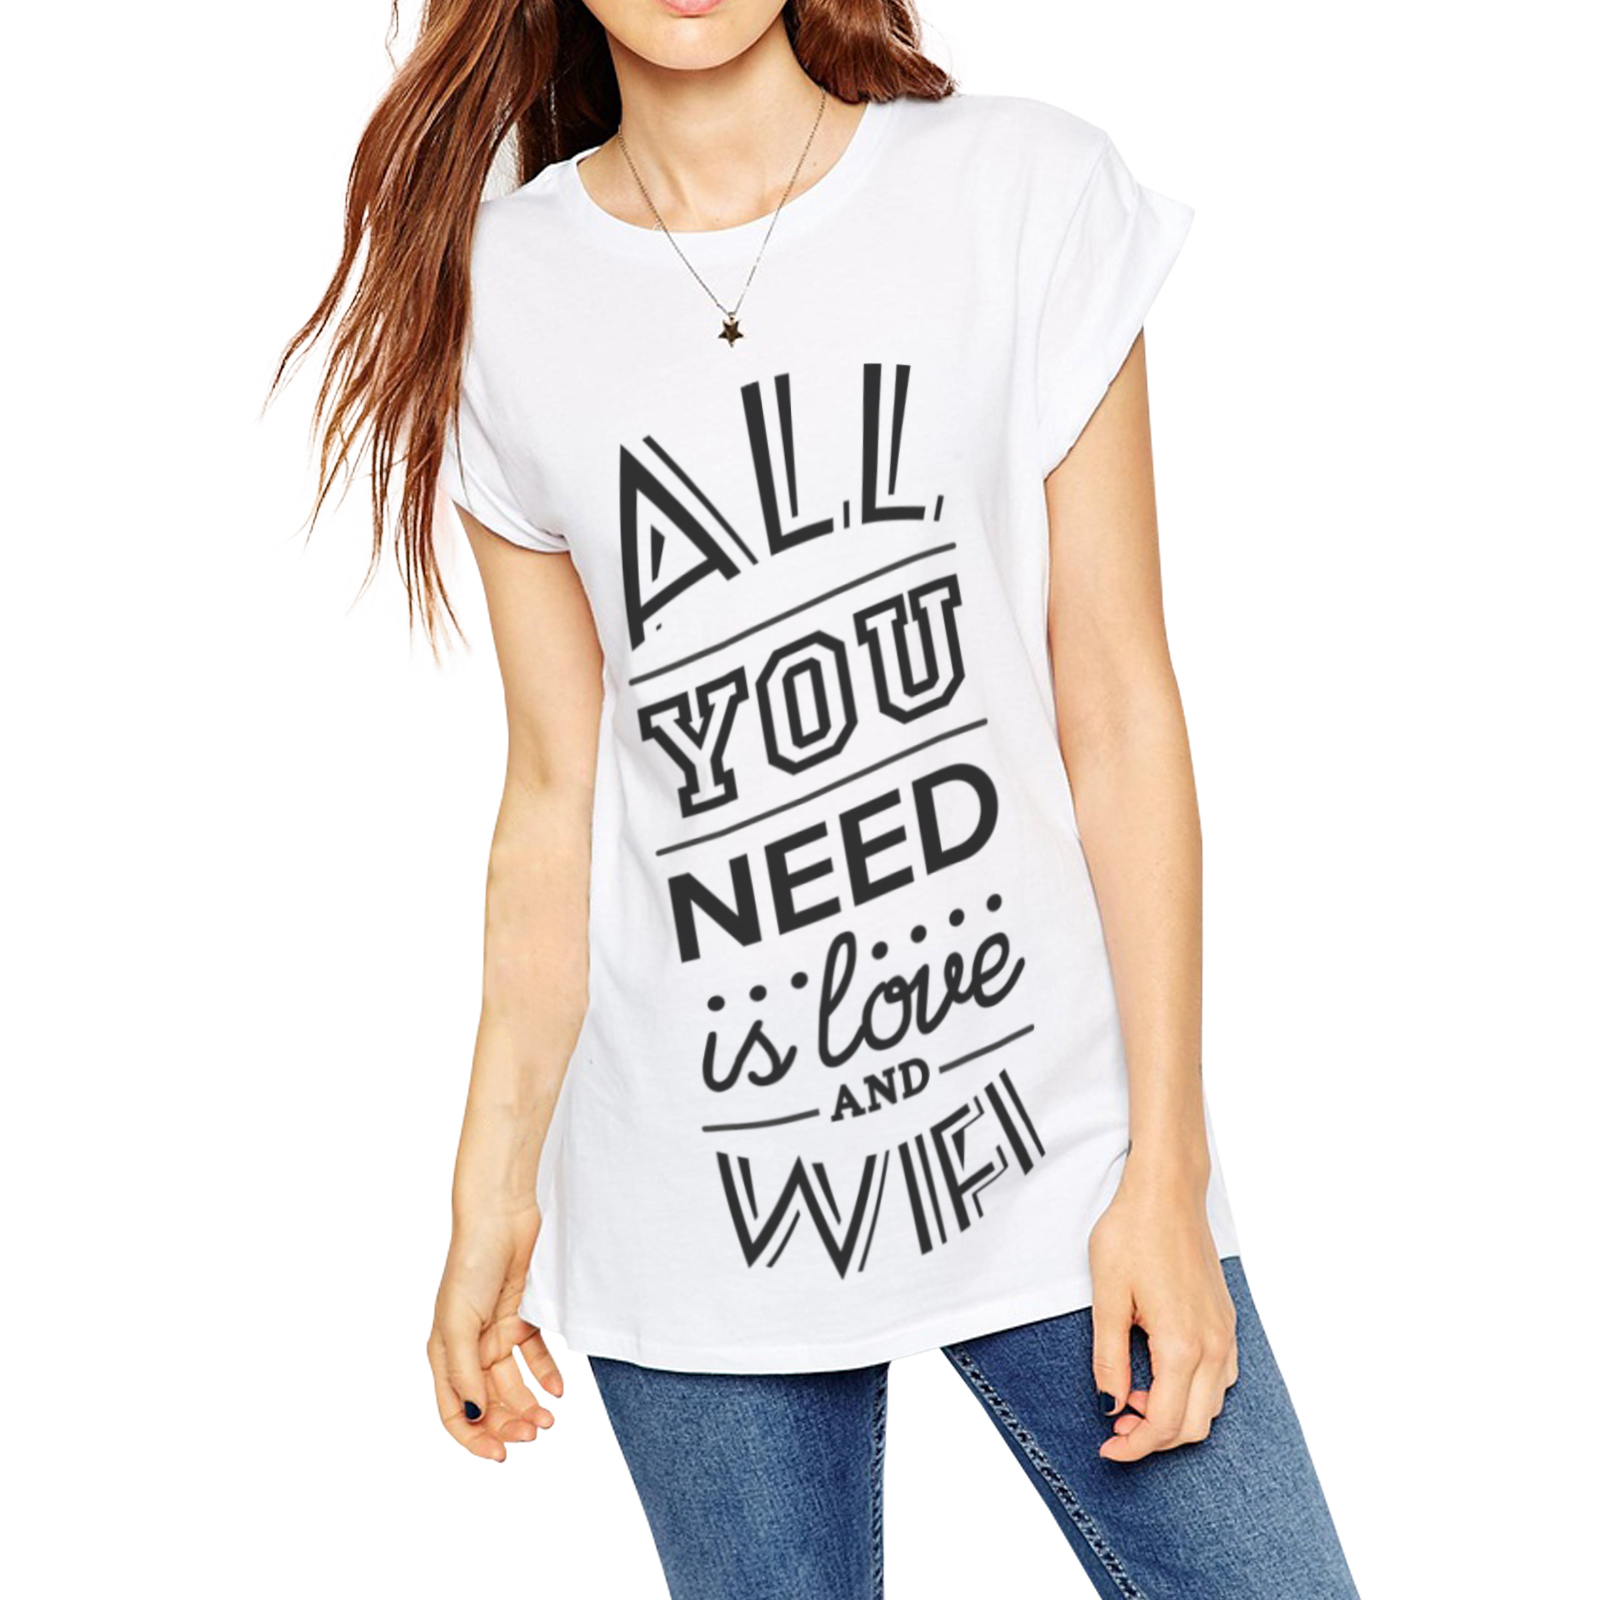 Some Cute and Funny Women T-Shirts Designs | Print My T-Shirt